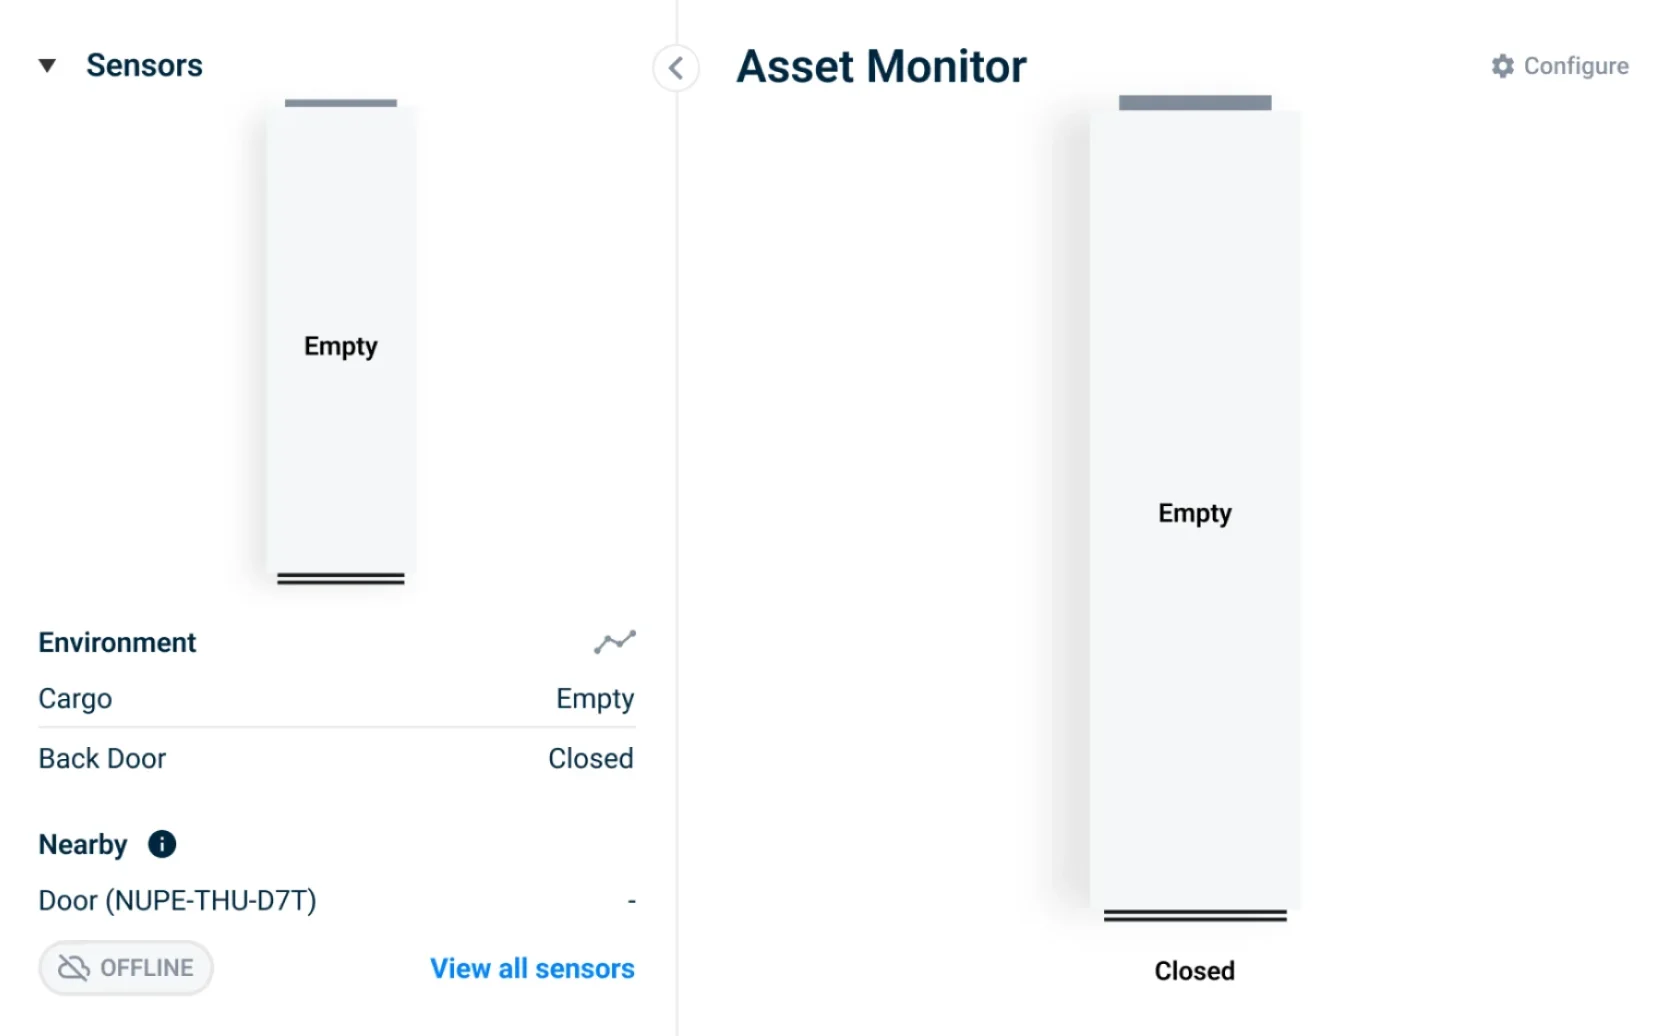 platform view of asset monitor and sensors showing cargo visibility.